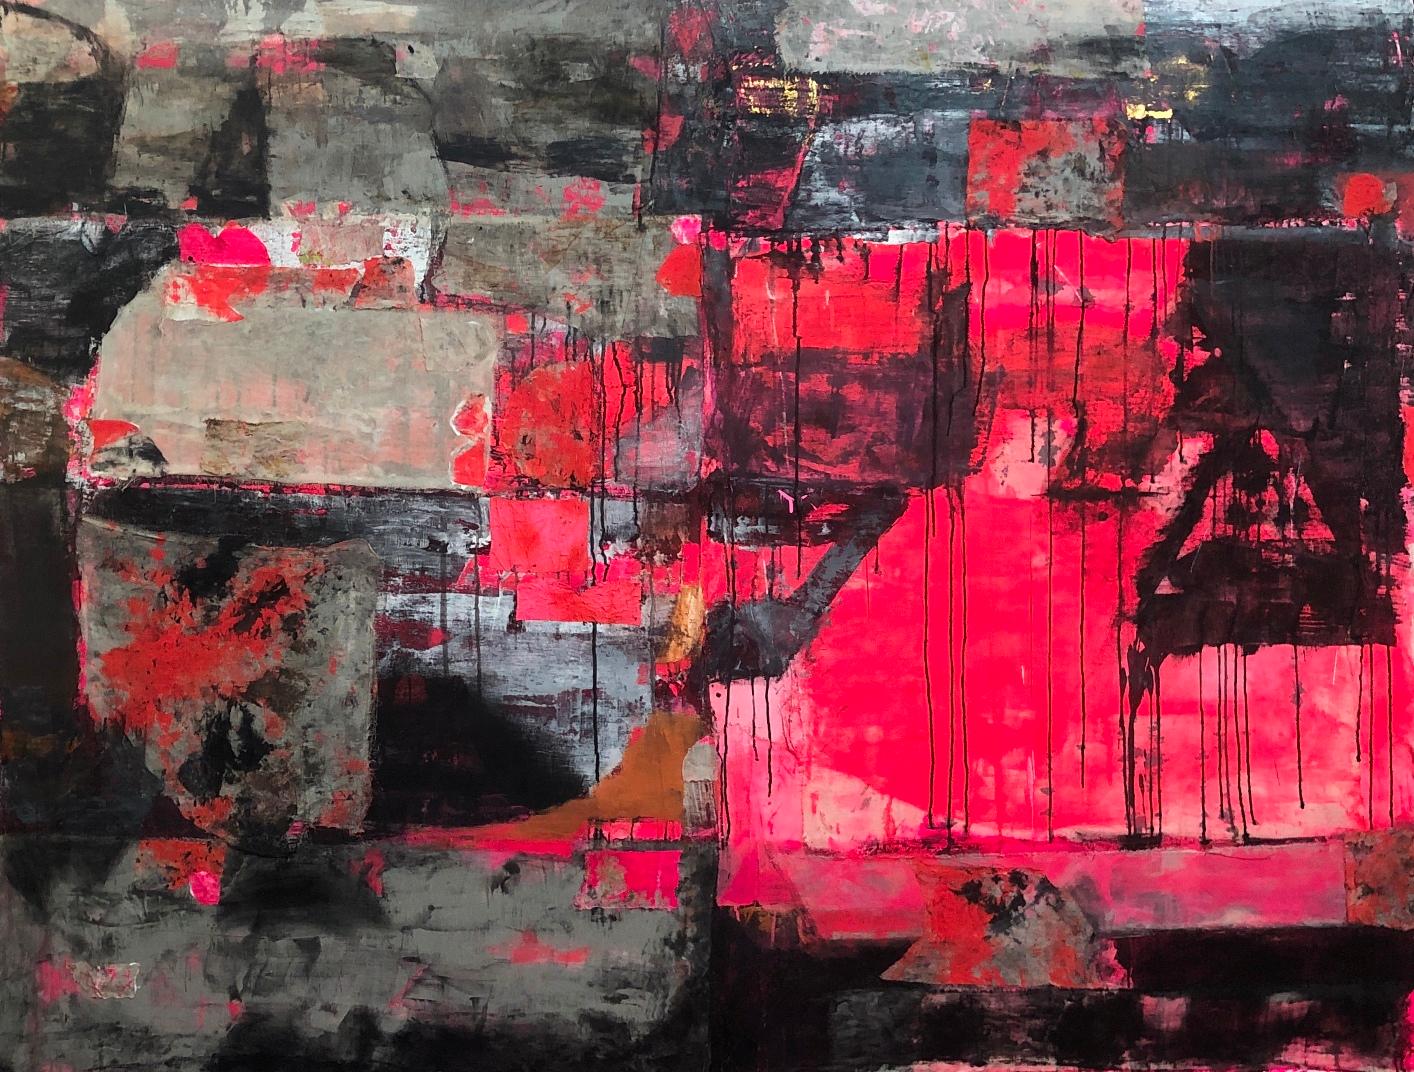 Gurunathan Govindhan - Untitled
Pigment on Canvas, 84 x 60 inches